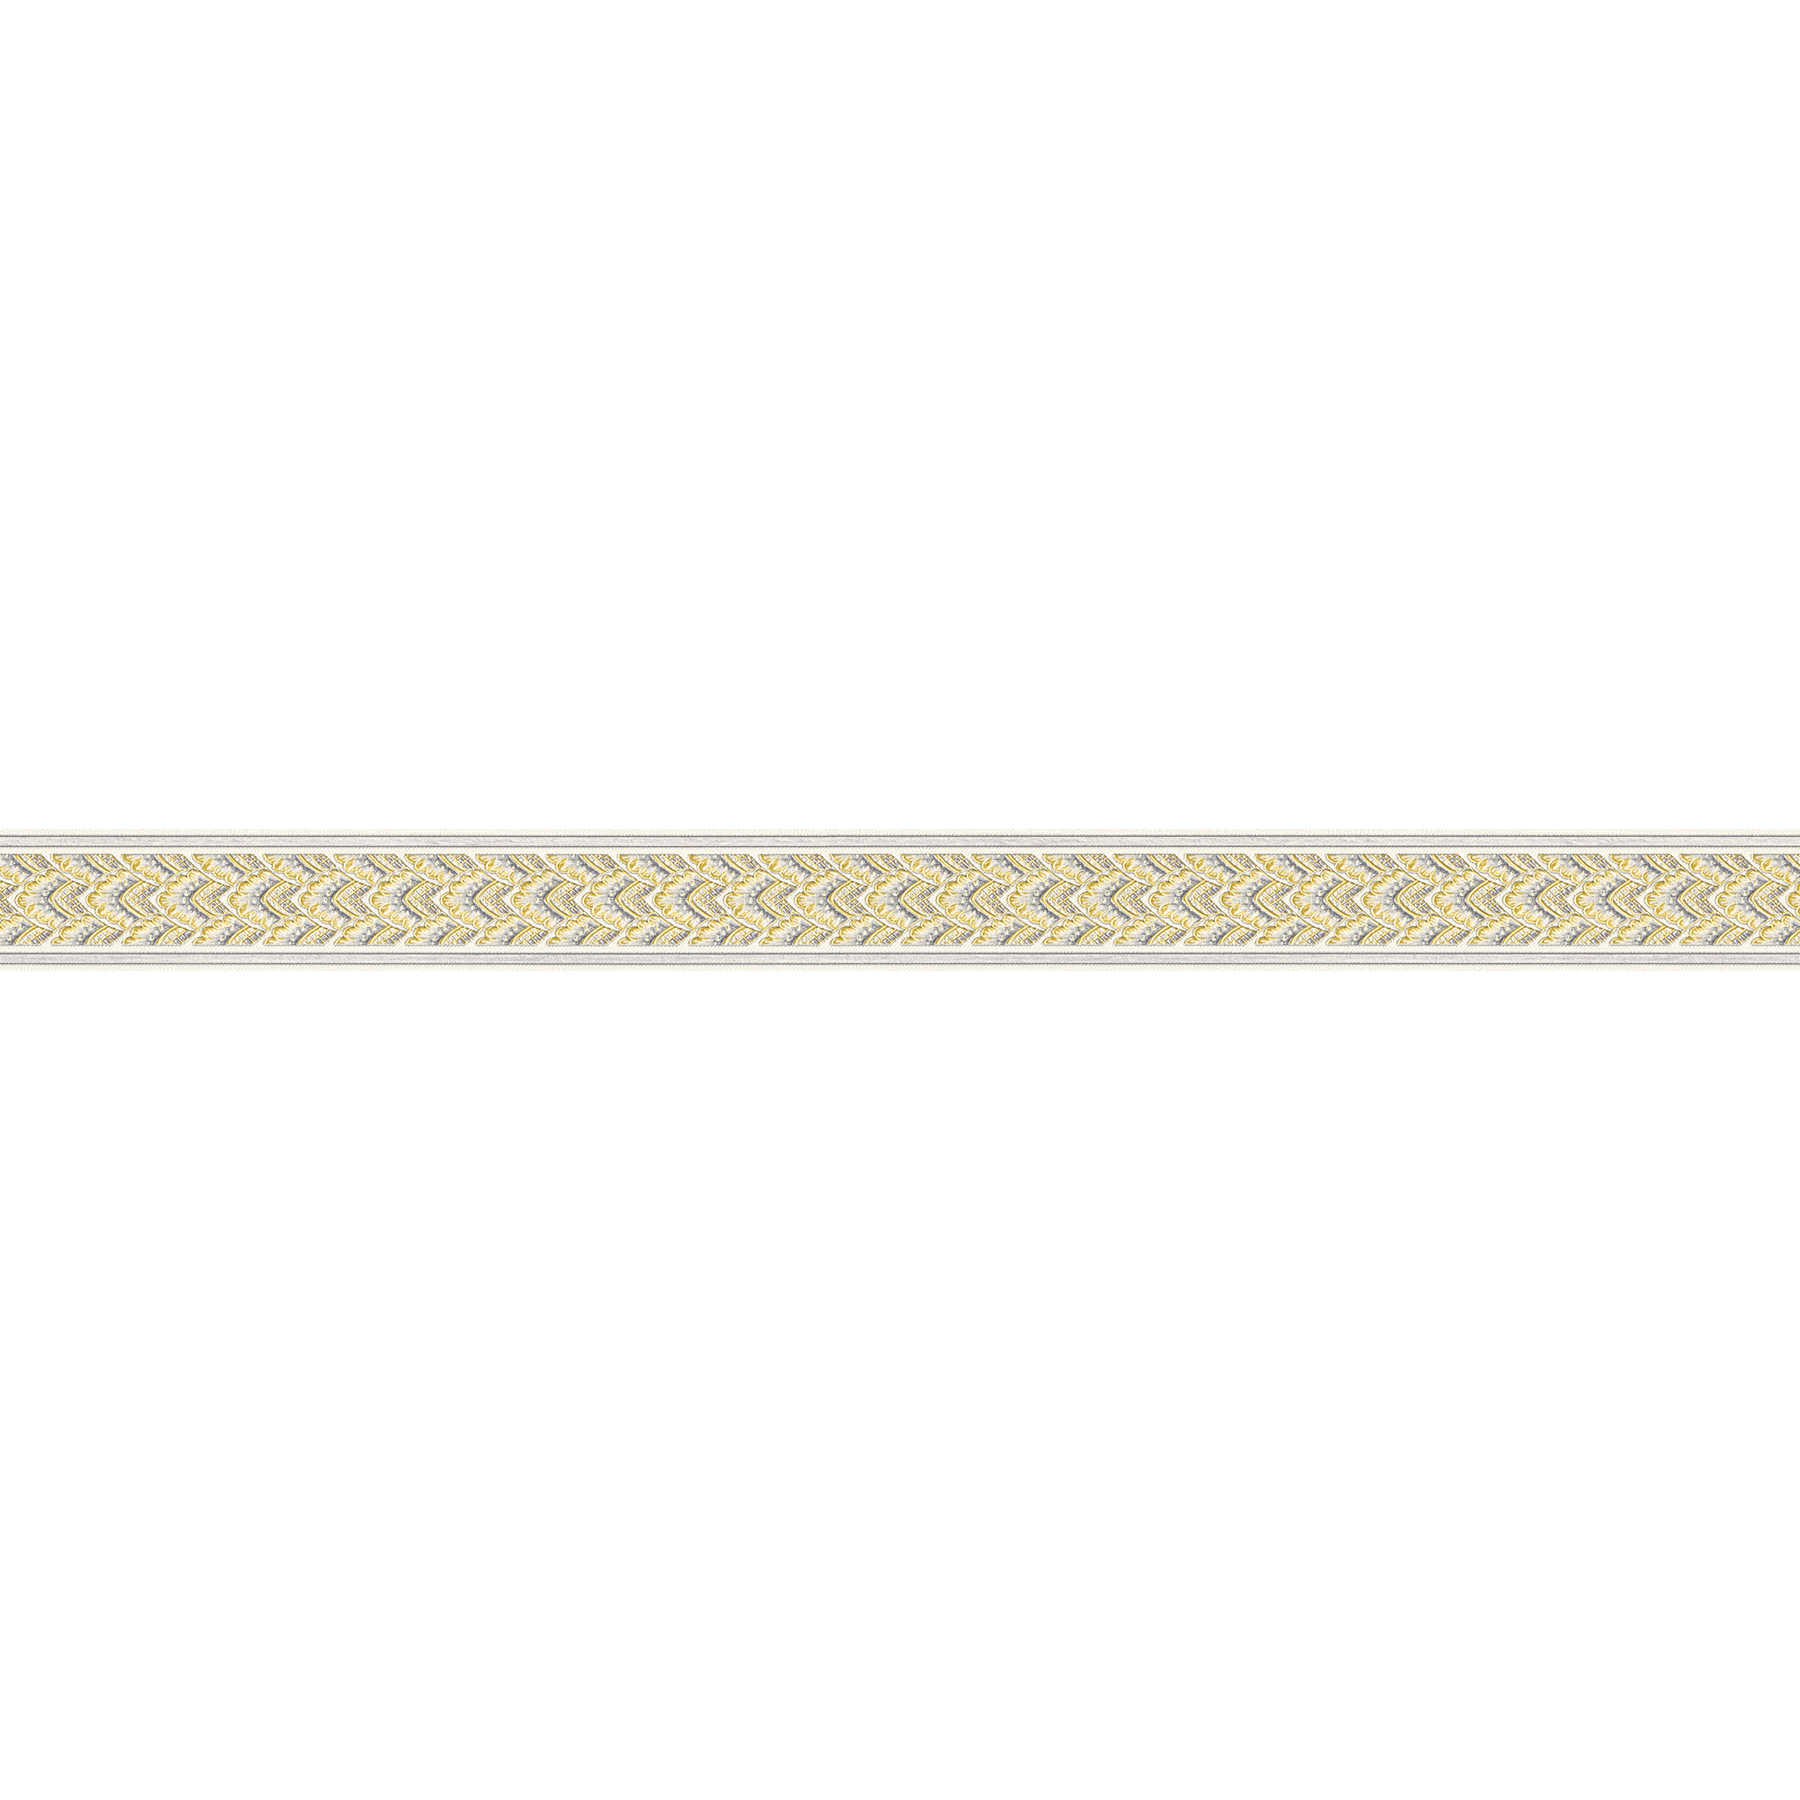         Metallic wallpaper border with shell pattern in gold & silver
    